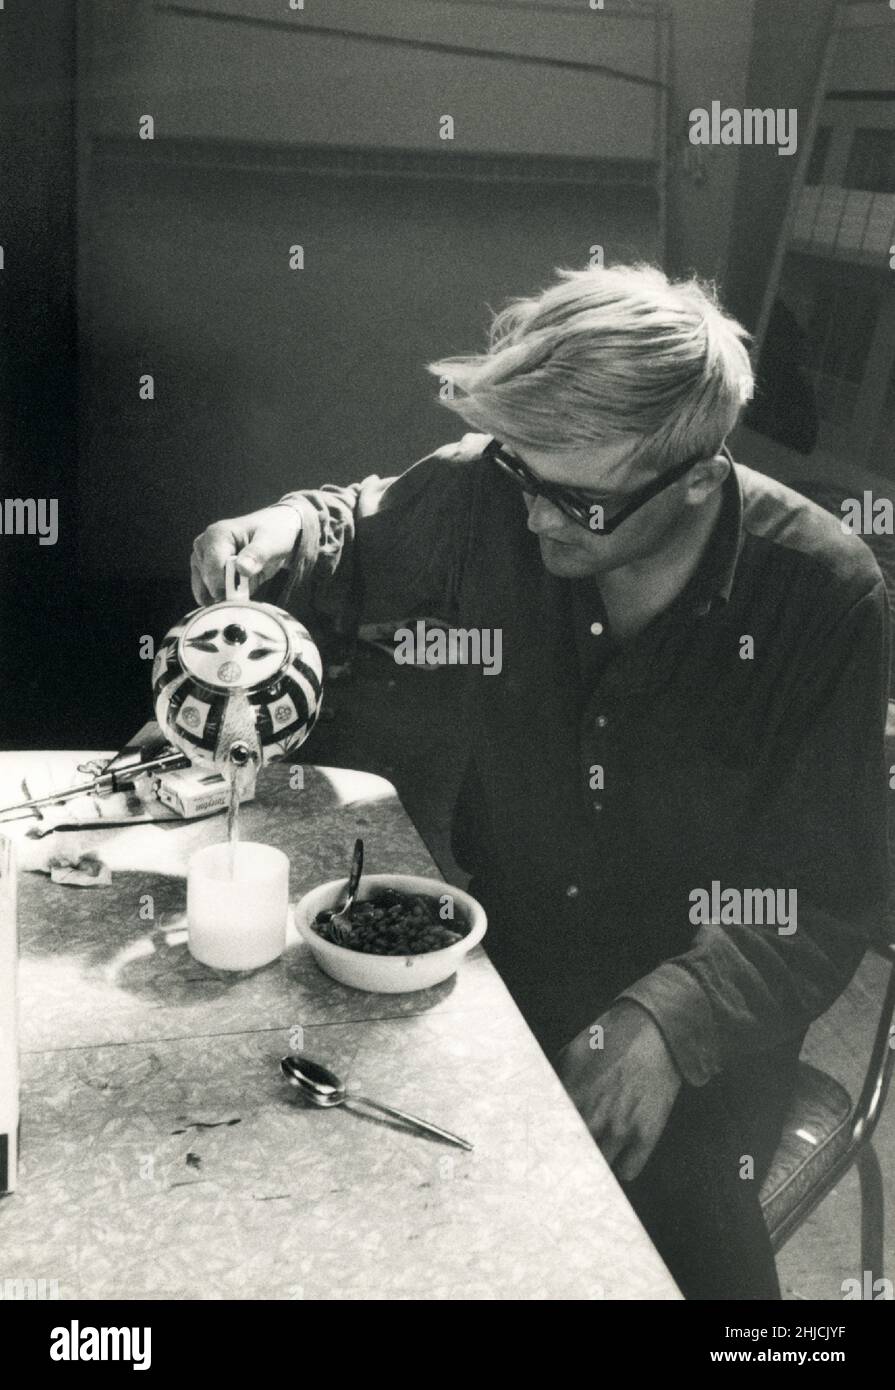 Painter David Hockney makes tea at his home studio in Los Angeles, 1966. Hockney was a major contributor to the British Pop art movement of the 1960's, and lives today in Los Angeles, California. Stock Photo